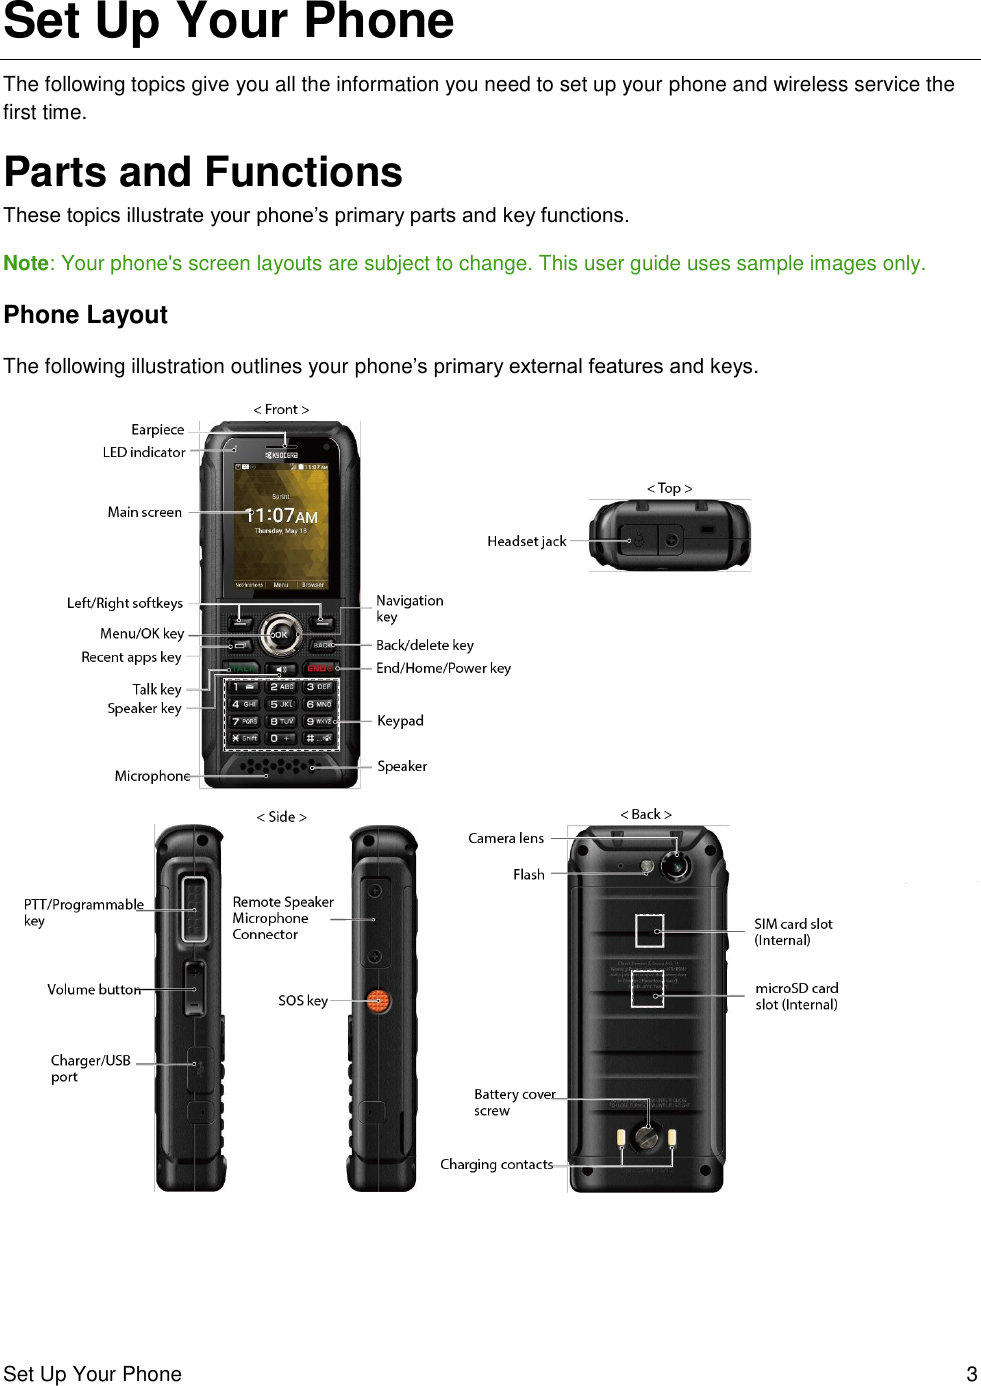 Set Up Your Phone  3 Set Up Your Phone The following topics give you all the information you need to set up your phone and wireless service the first time. Parts and Functions These topics illustrate your phone’s primary parts and key functions. Note: Your phone&apos;s screen layouts are subject to change. This user guide uses sample images only. Phone Layout The following illustration outlines your phone’s primary external features and keys.   